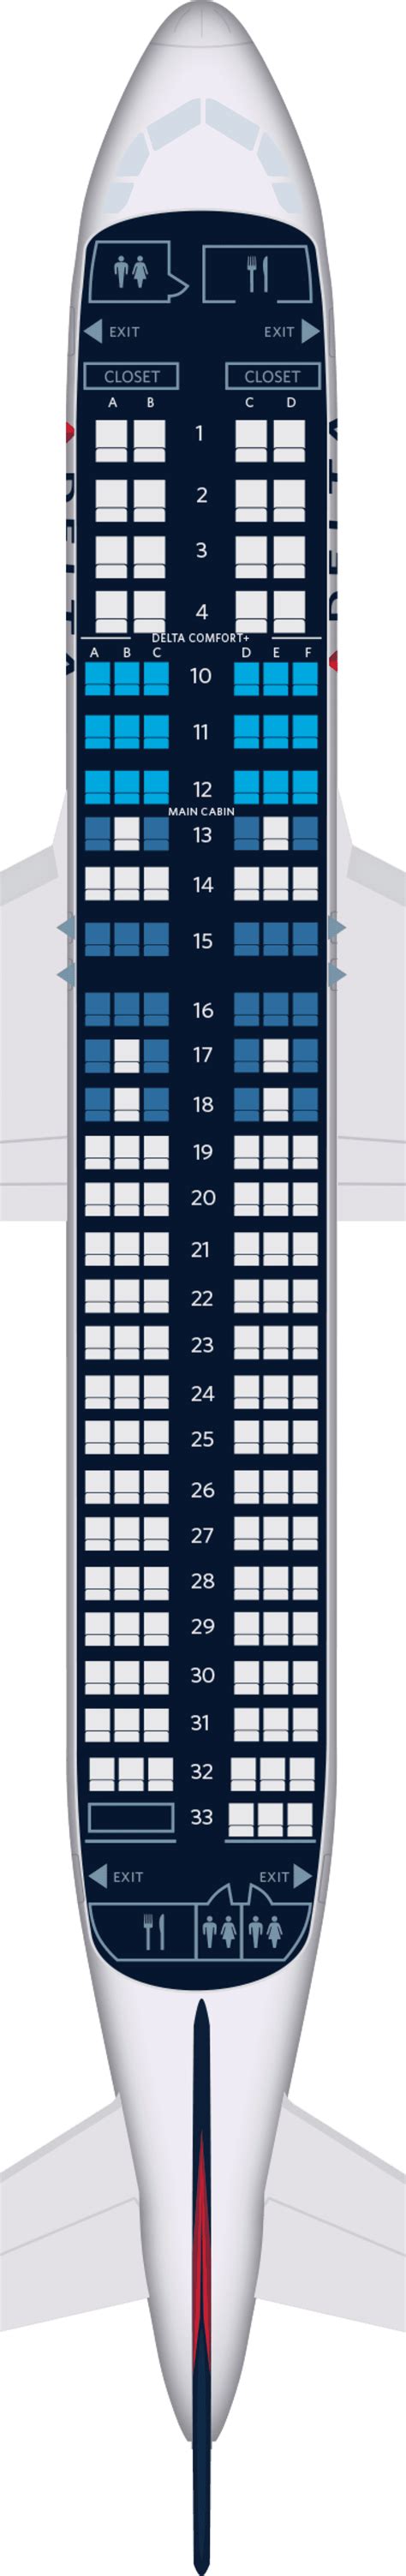 Delta airbus a320 seat map. Economy. Seats 165. Pitch 31". Width 17.5". Recline 3". The Airbus A320-200 V.1 series, offers an economy class that's optimized for longer regional routes. Catering to 165 passengers, the environment is spacious with ergonomic seating. A wide range of entertainment options is available, and the crew remains attentive to passenger needs ... 